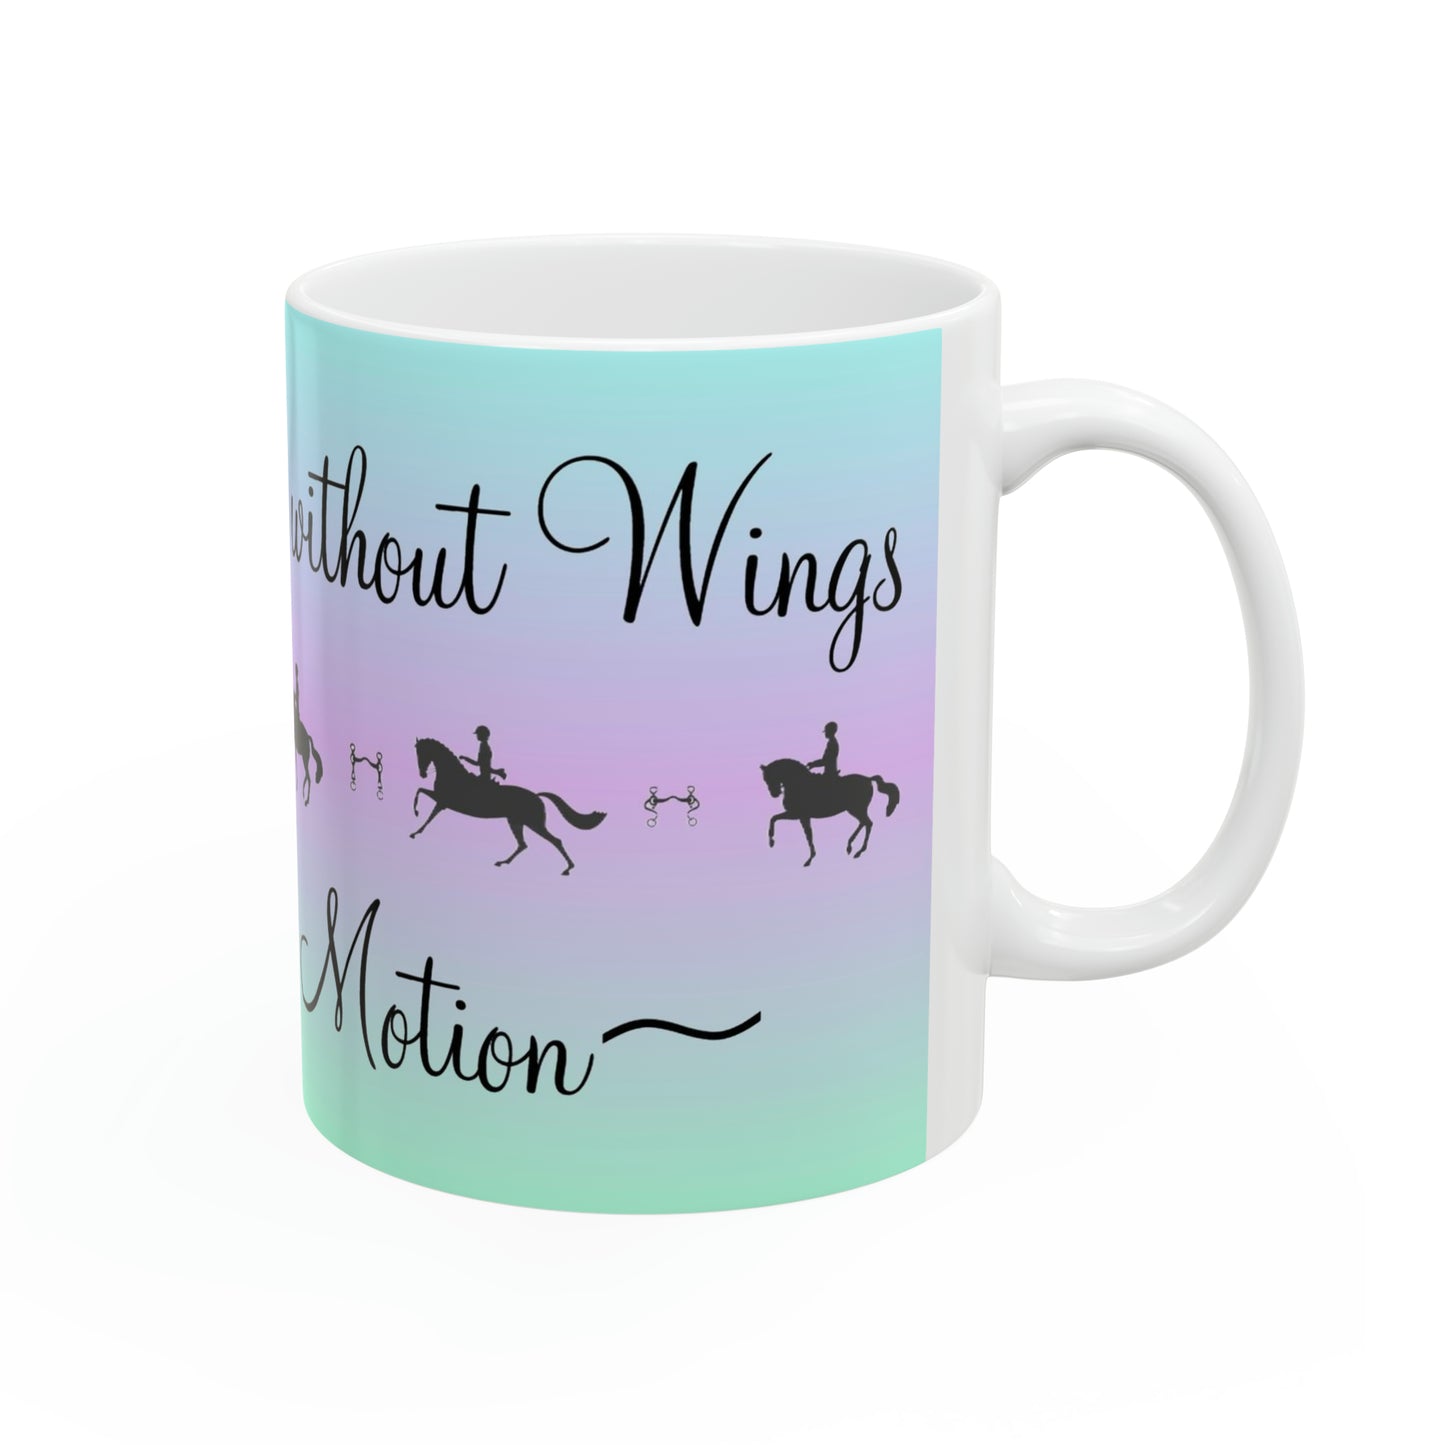 J5035 Mug Ceramic 11oz-Horse-Dressage-Inspirational-Riding is Flight without Wings~Poetry in Motion